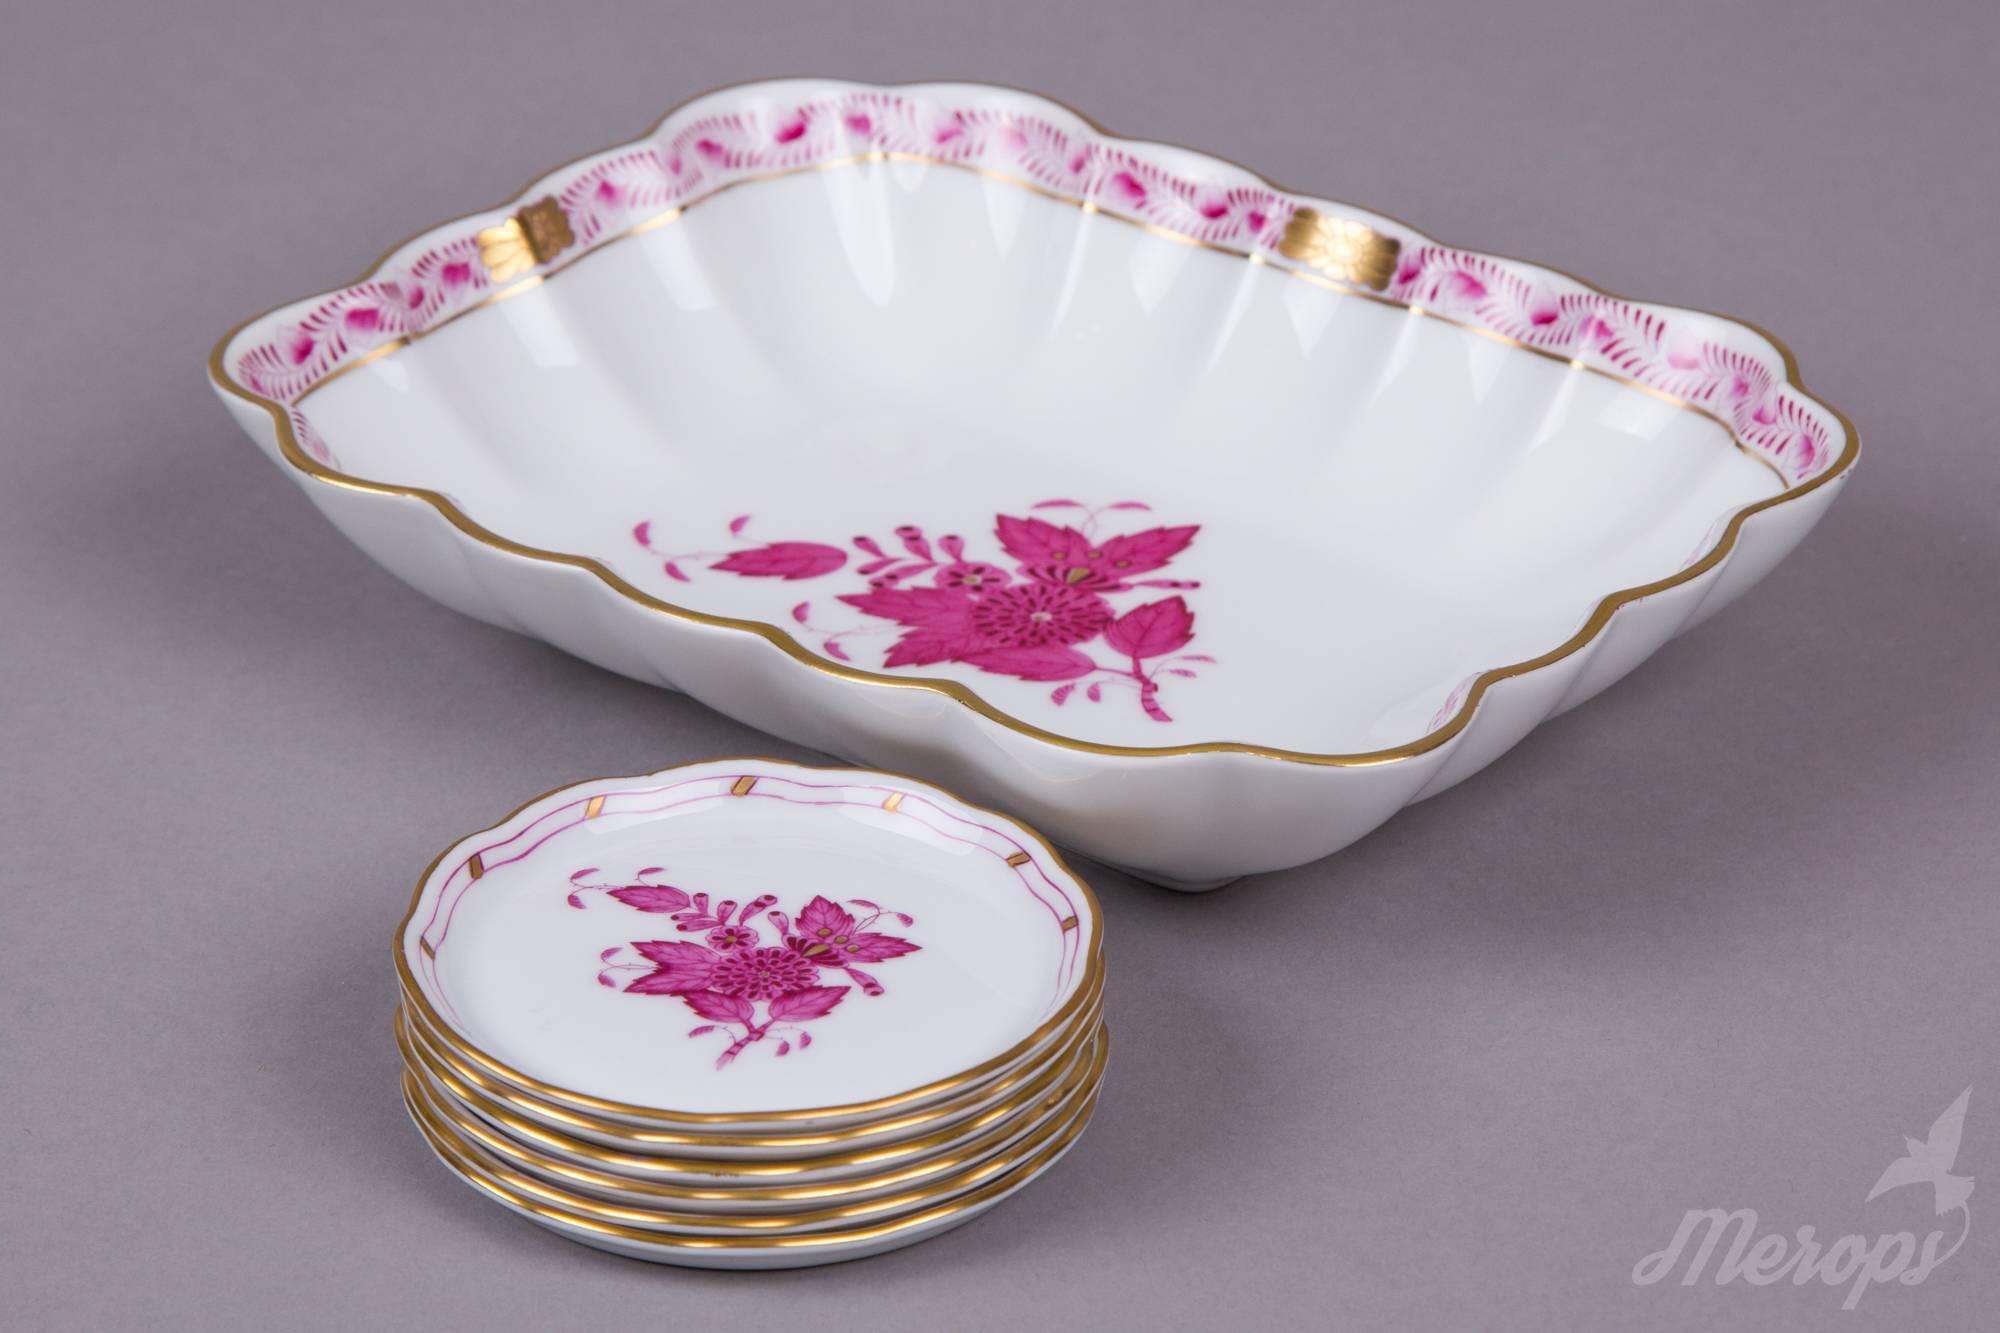 We ship this item worldwide for 35 USD with insurance. Shipping usually takes 5-10 business days. 

Manufacturer:	Herend Porcelain Manufactory (Hungary)
Quality:	Handpainted, 1st class
Pattern:	Chinese Bouquet Raspberry